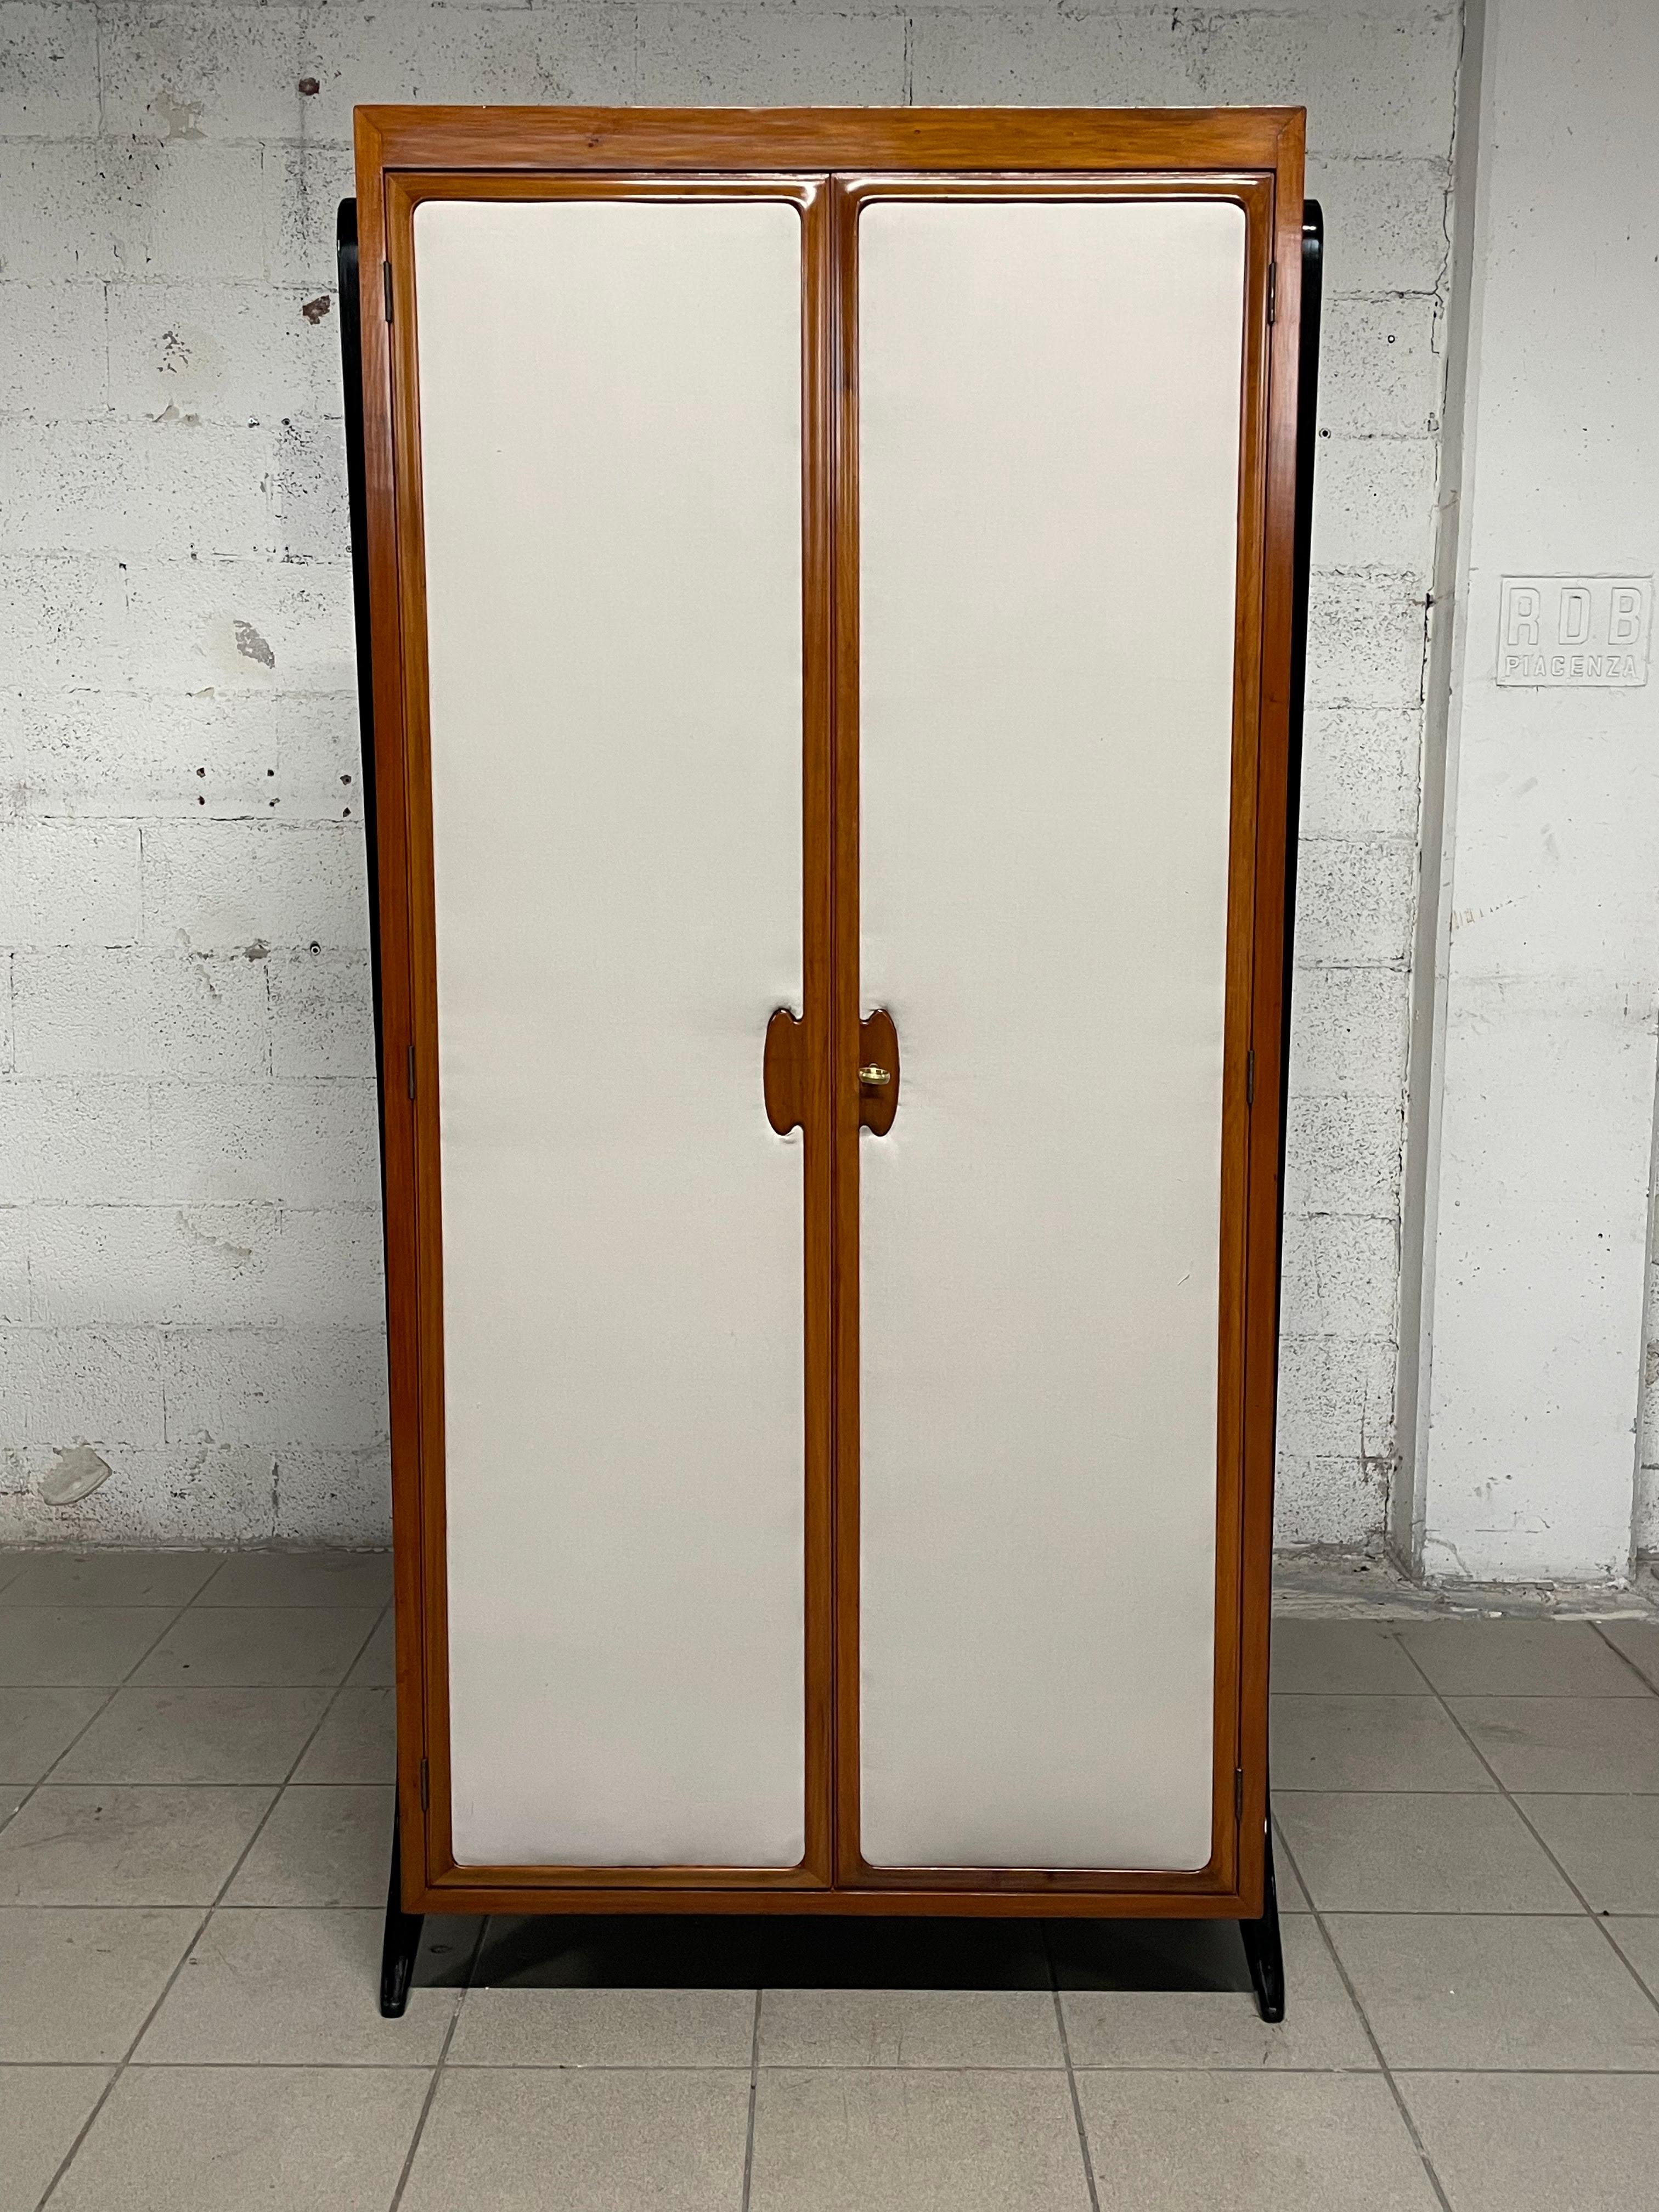 Closet - wardrobe 1950s. 

Small size but with space inside organized in hangers and shelves.
Pear wood frame with ebonized wood supports.
The front of the two doors is covered with fabric panels.
The cabinet has been completely restored in a